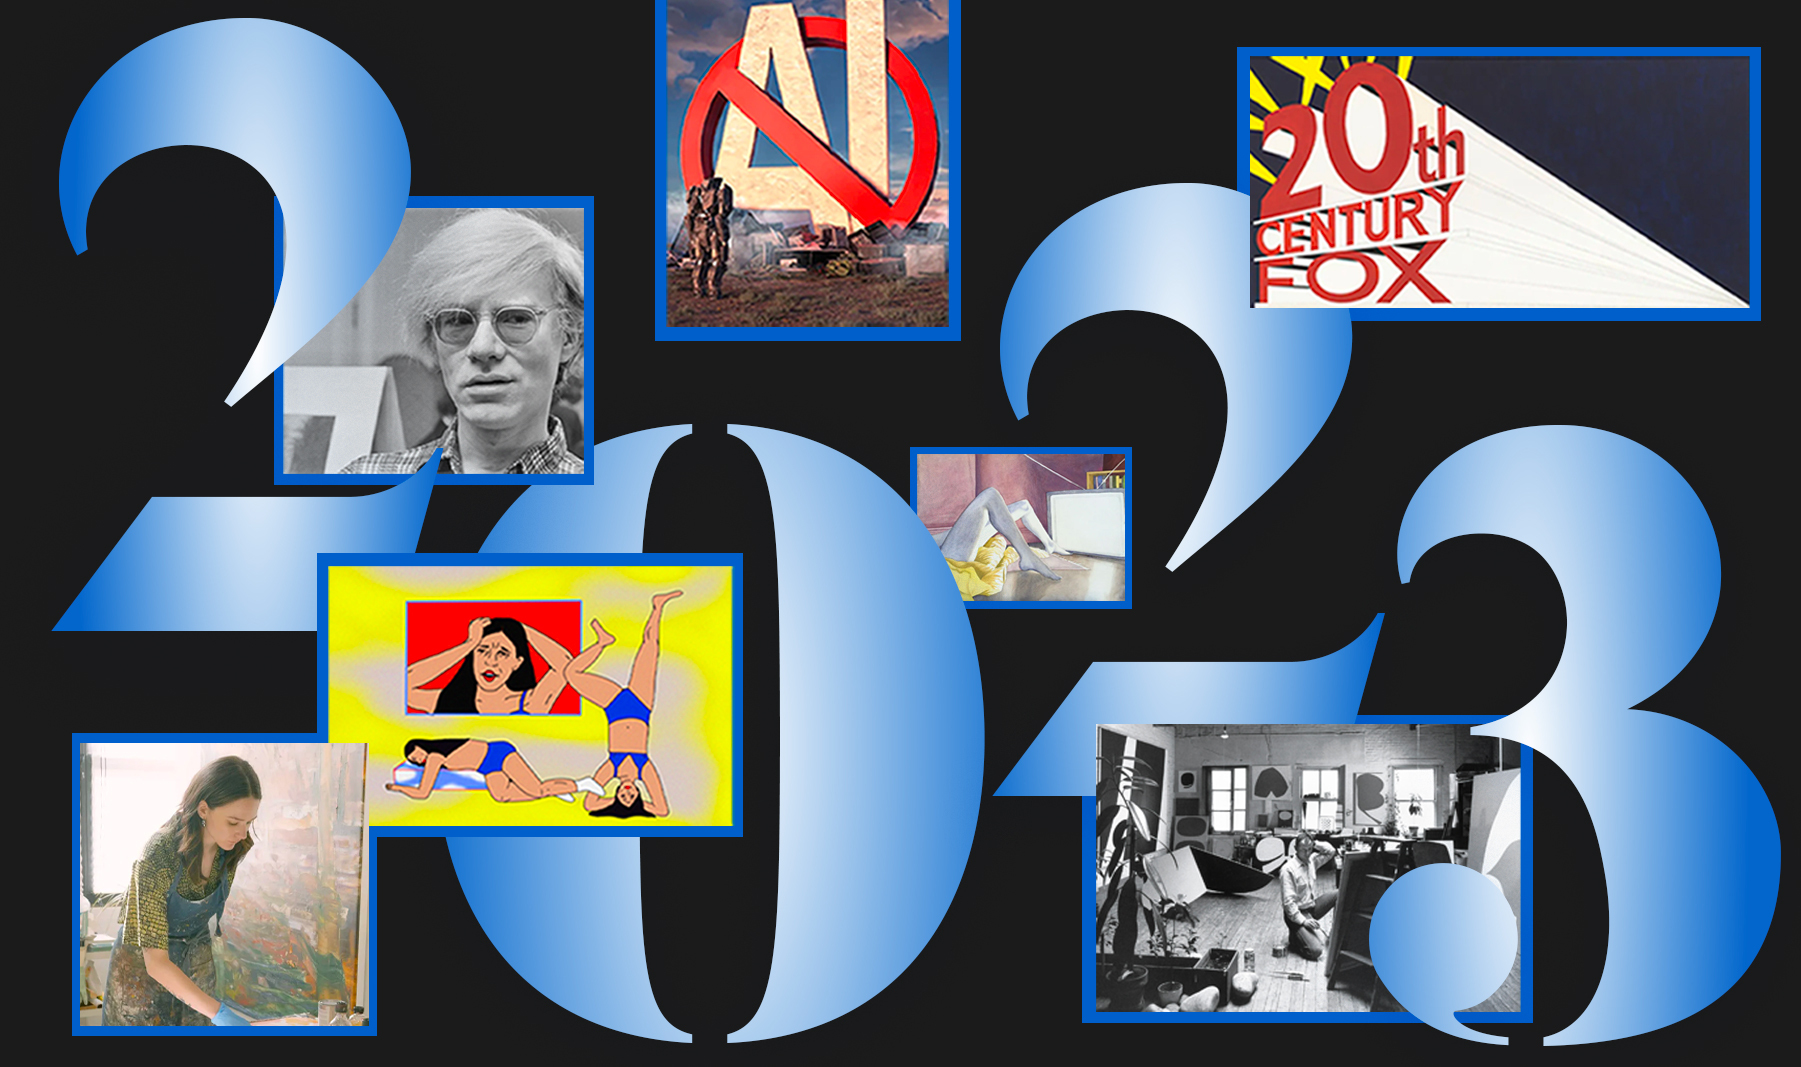 Playful blue letters spell out 2023 with 7 small versions of the images described in the stories below collaged about.